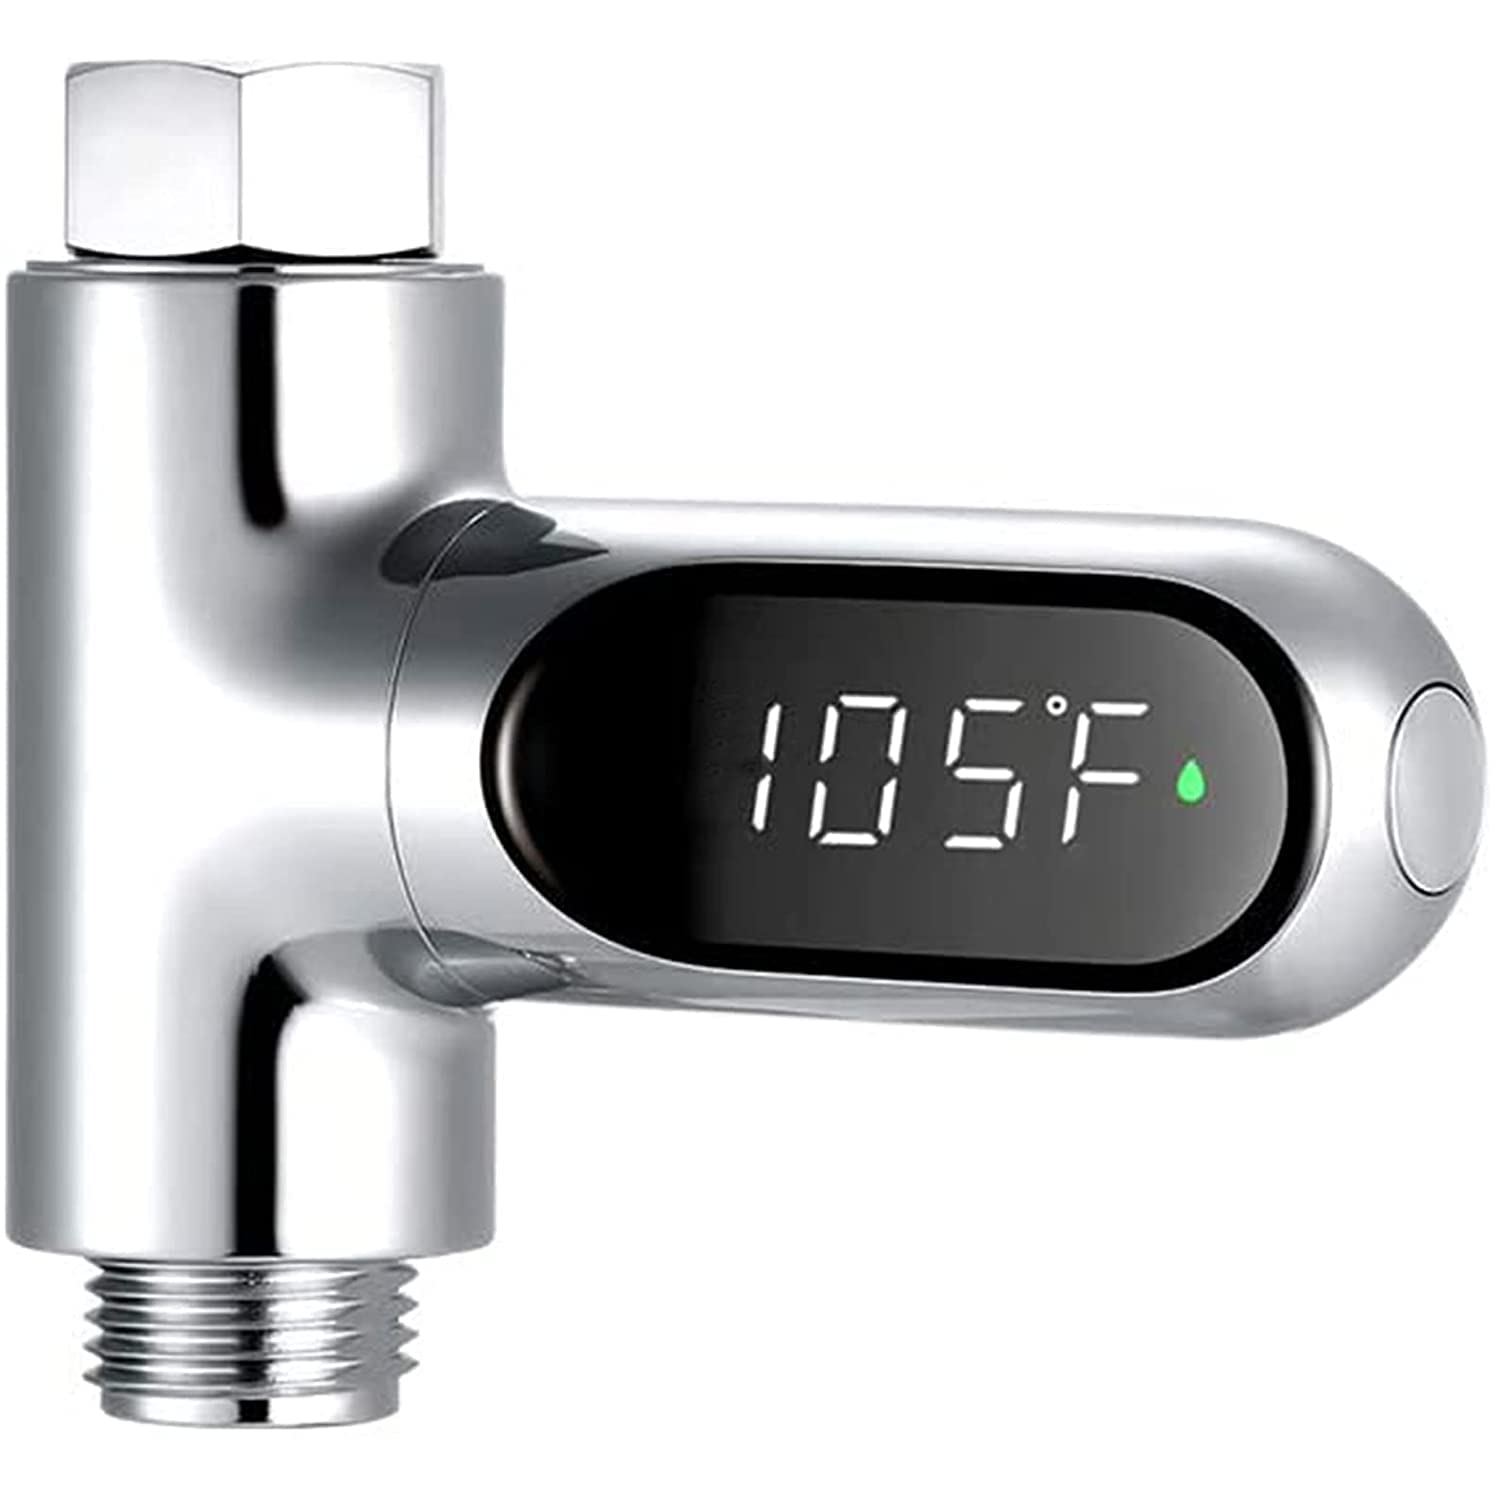 Shower Thermometer Second Generation Led Digital Display Baby Bath Water Fahrenheit Celsius Thermometer 360°Rotating Screen for Home Bathroom Kitchen k2